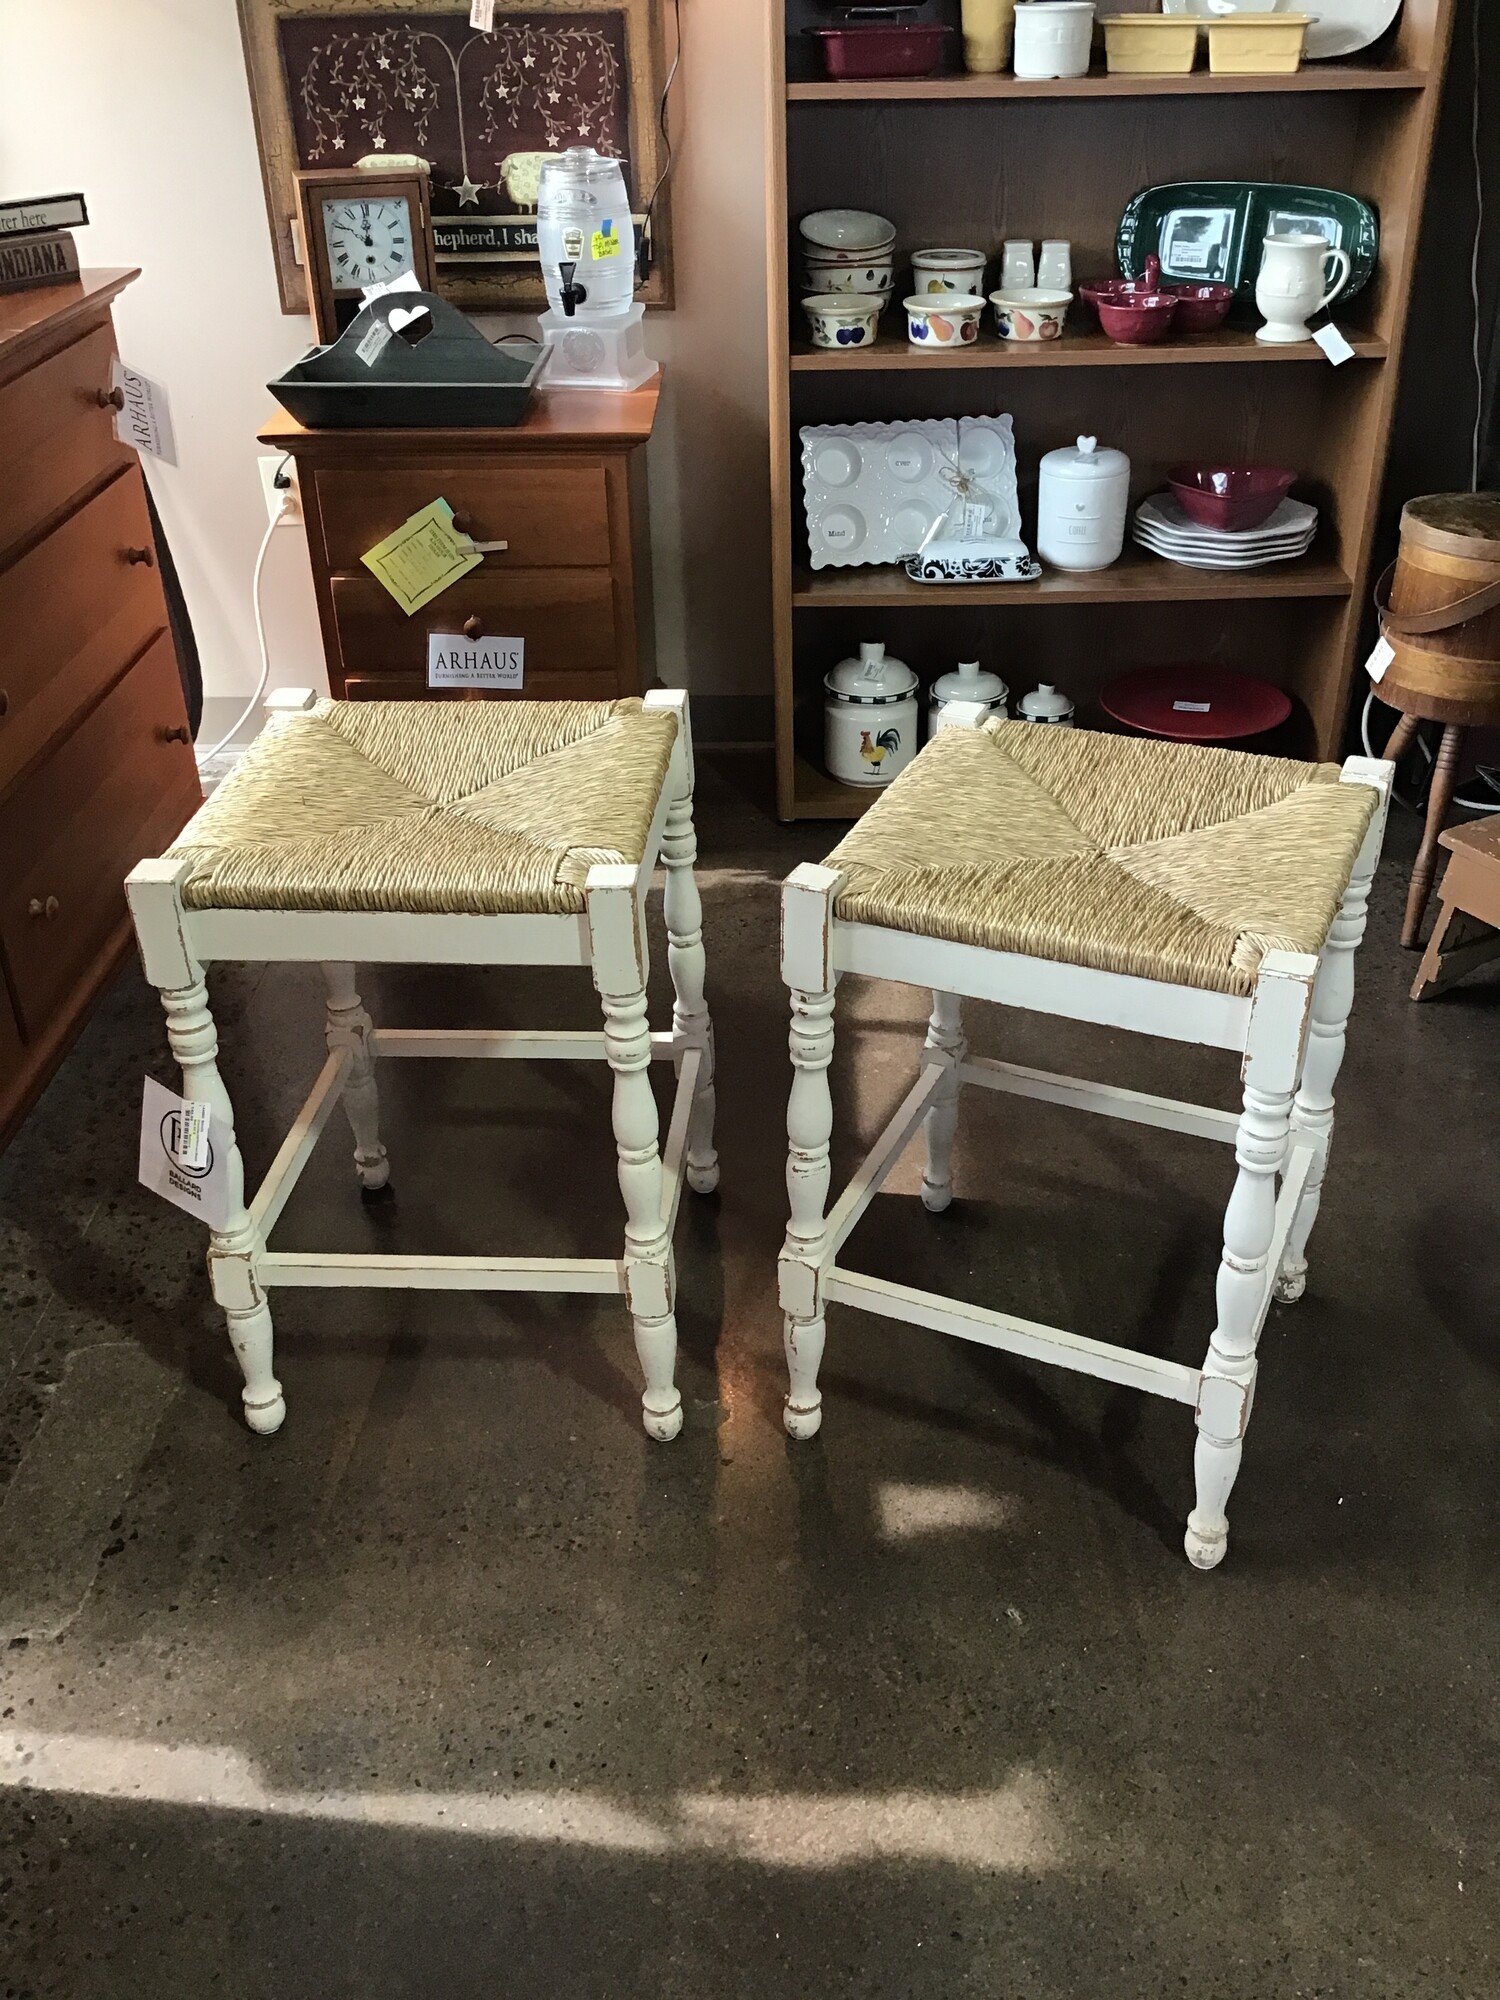 Style, a touch of texture, extra seating!  This pair of Ballard counter stools does it all. They bring fresh style and casual comfort to breakfast nooks, eat-in kitchens and grand dining rooms. Rush seats over a distressed cream frame for an artisan style piece.

Dimensions:  25 inches high